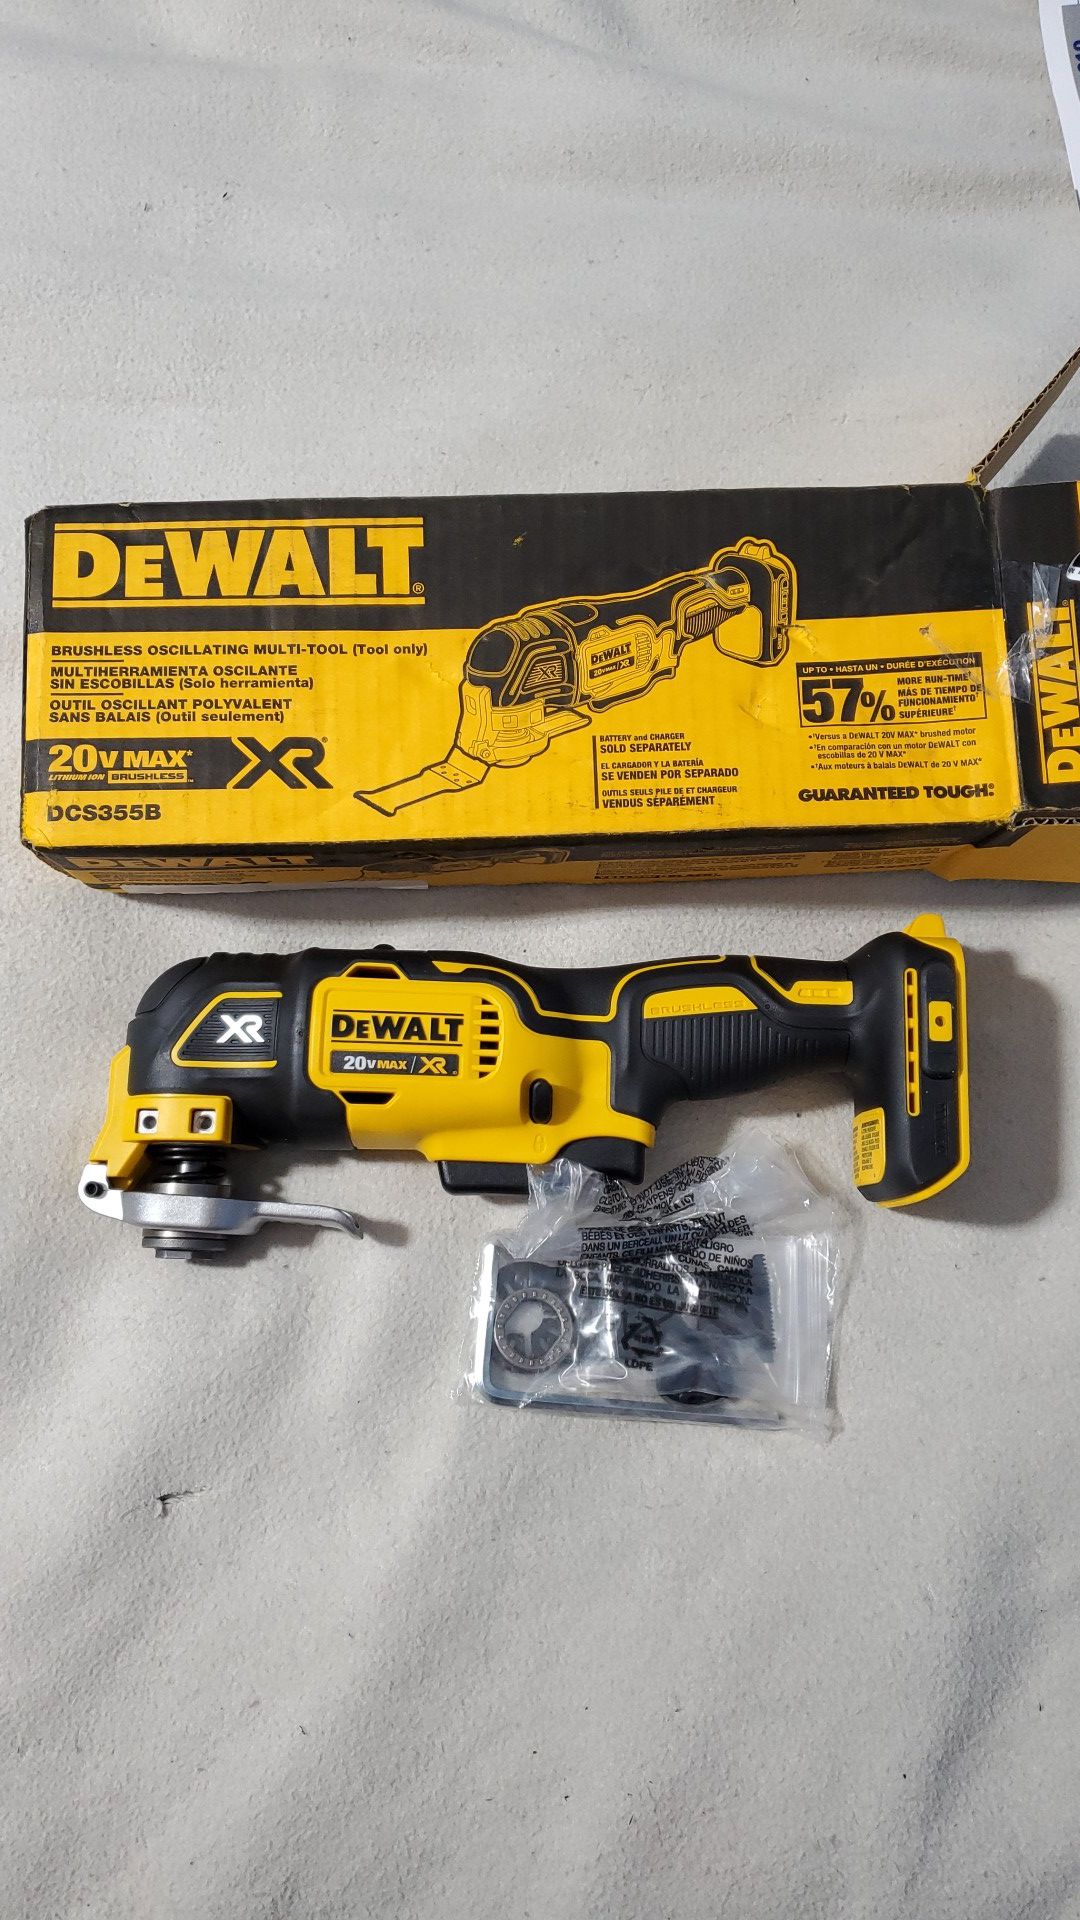 Dewalt 20V Max XR Brushless Oscillating Multi Tool. Tool Only. New In box. Price is firm